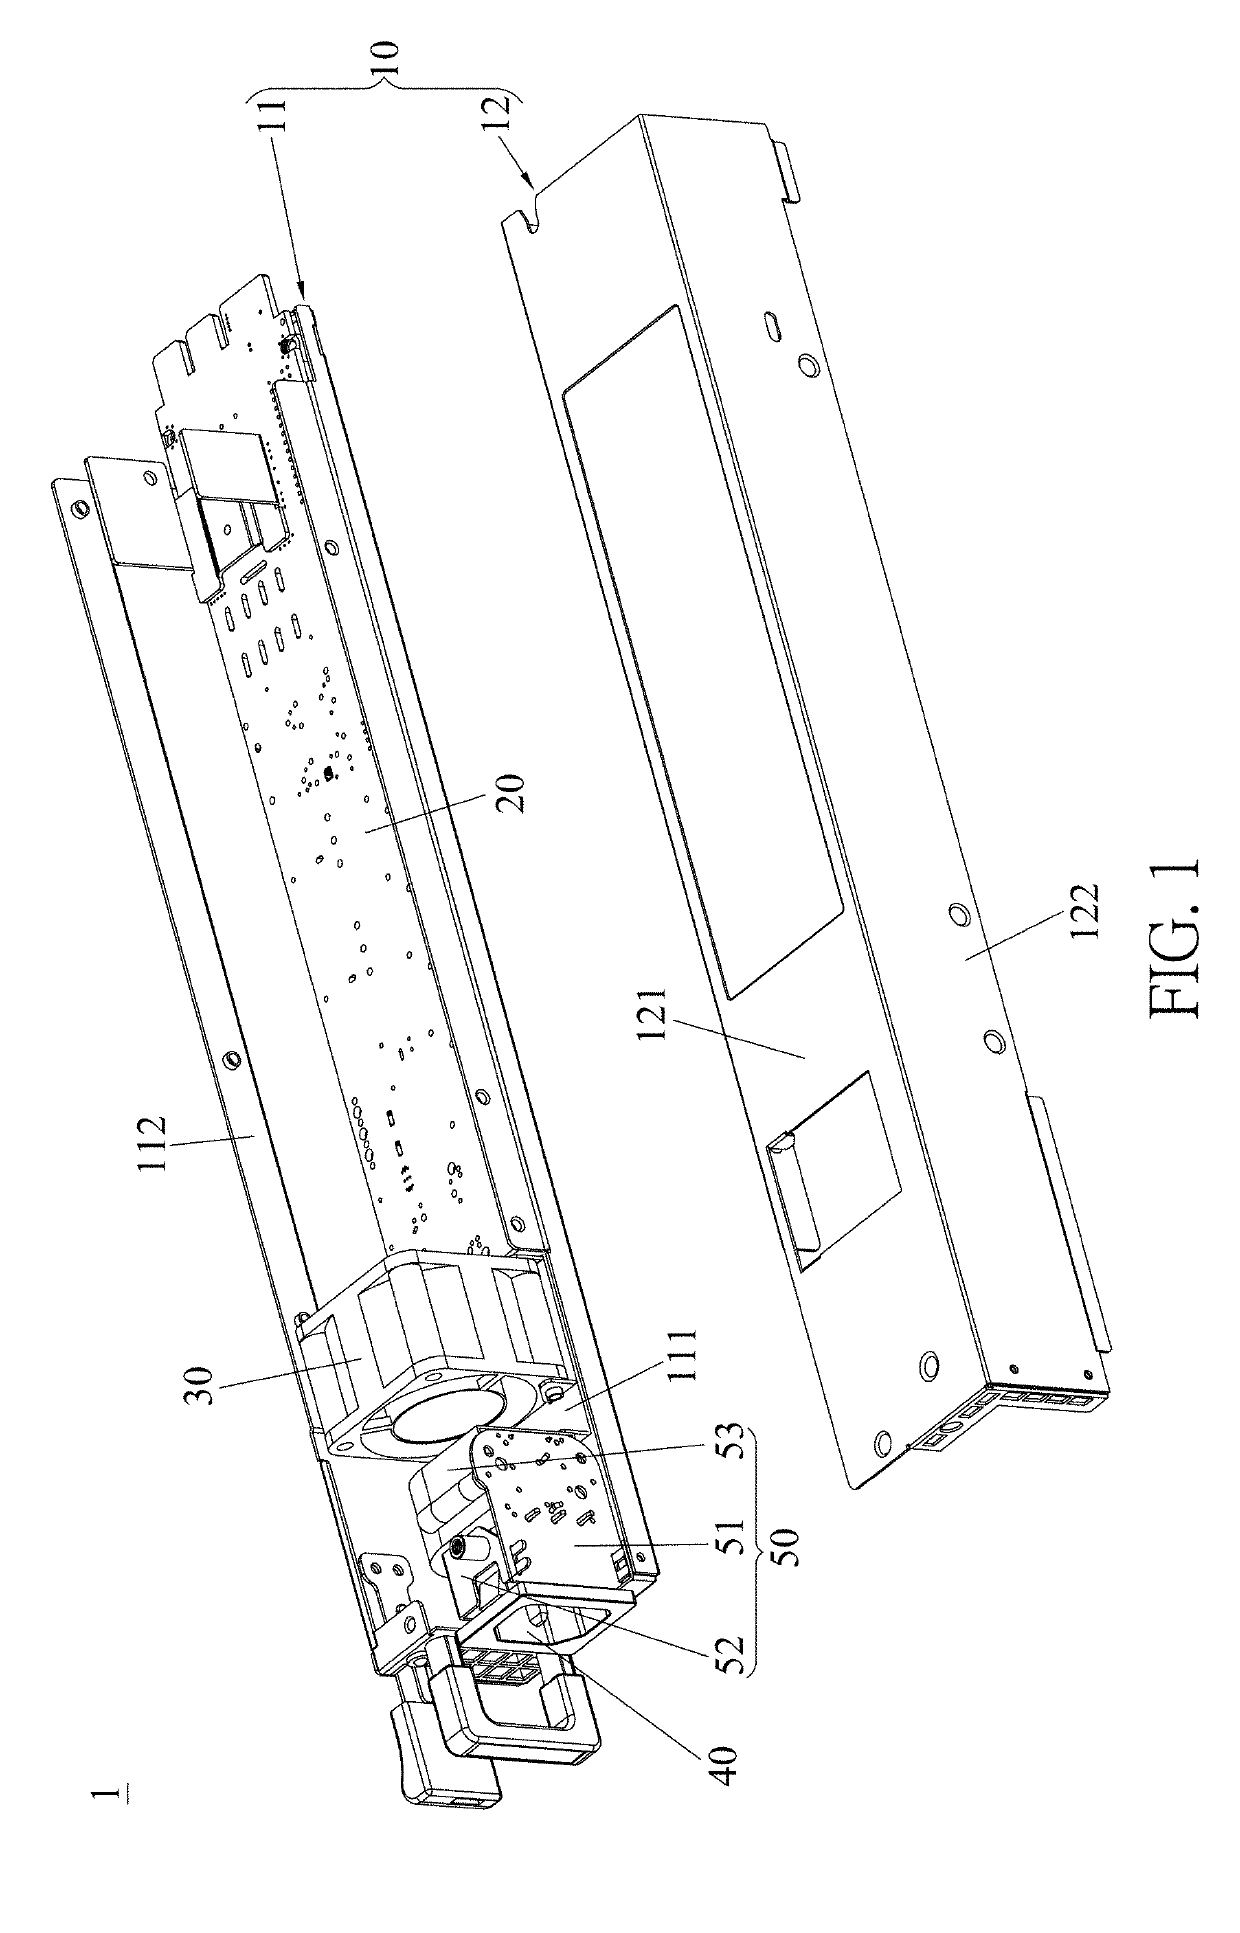 Electromagnetic shielding assembly, electromagnetic interference and lightning protection module and power supply